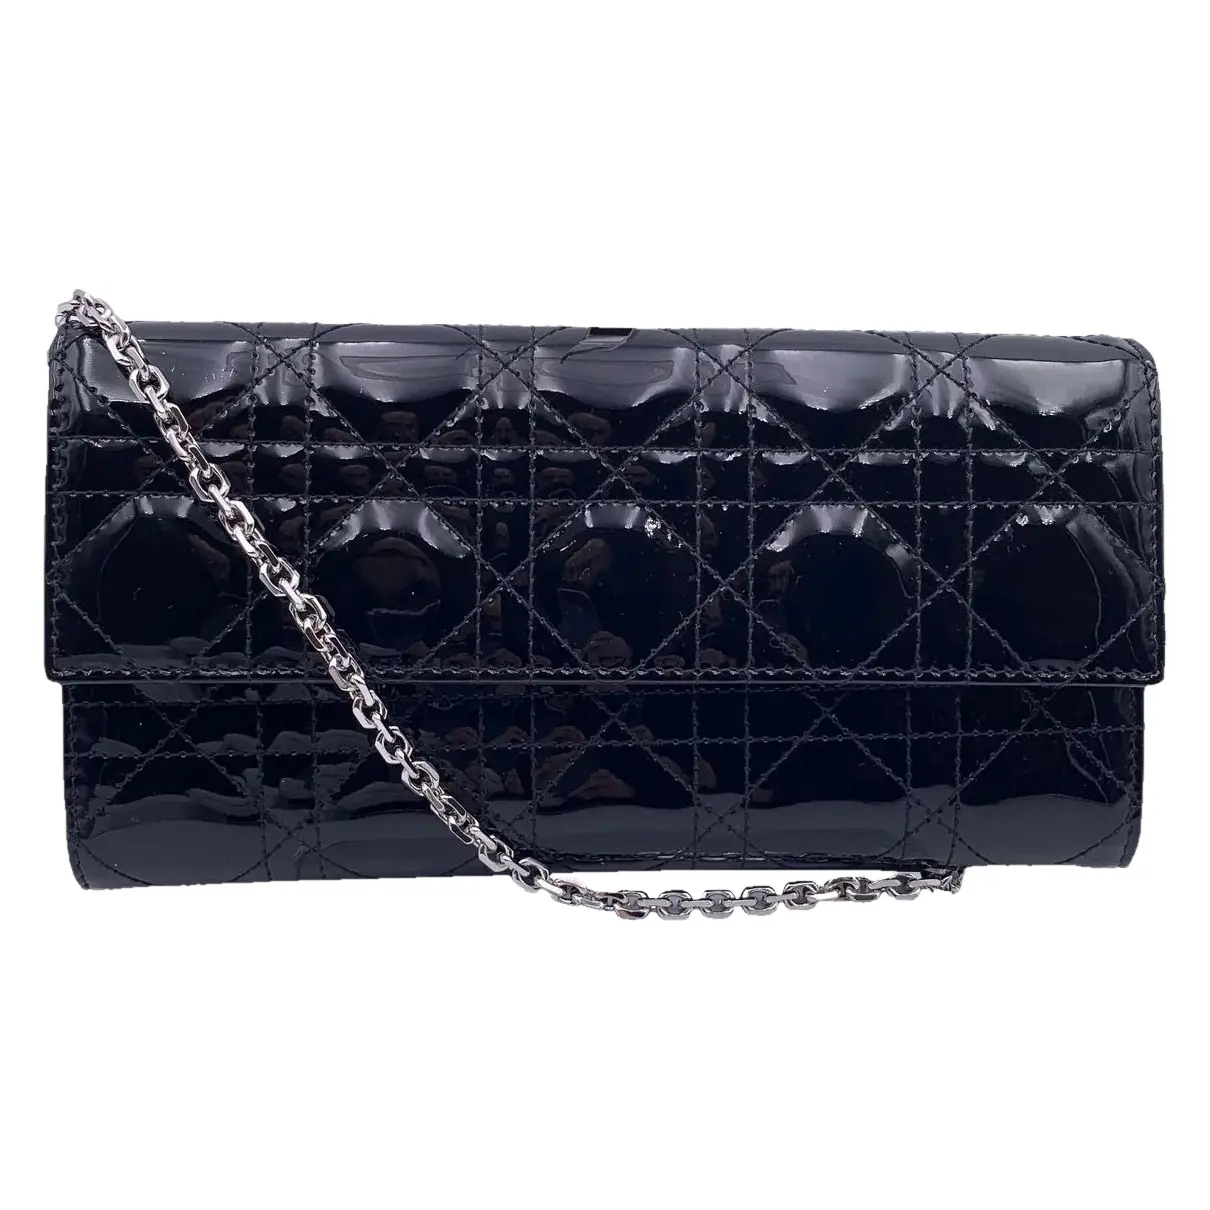 Patent leather clutch bag Christian Dior